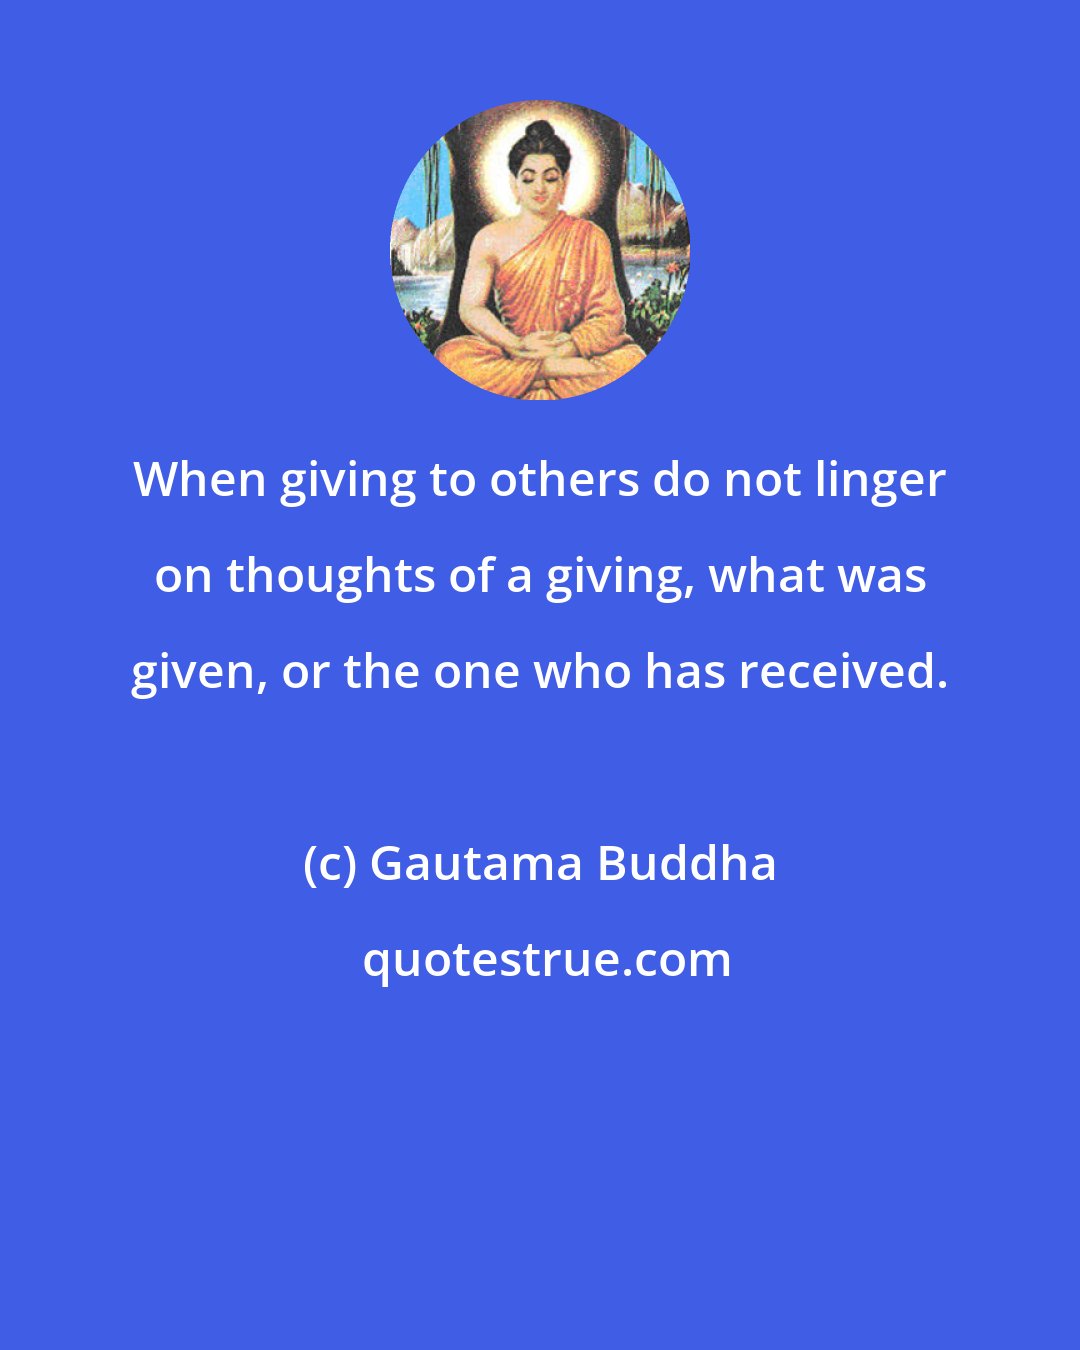 Gautama Buddha: When giving to others do not linger on thoughts of a giving, what was given, or the one who has received.